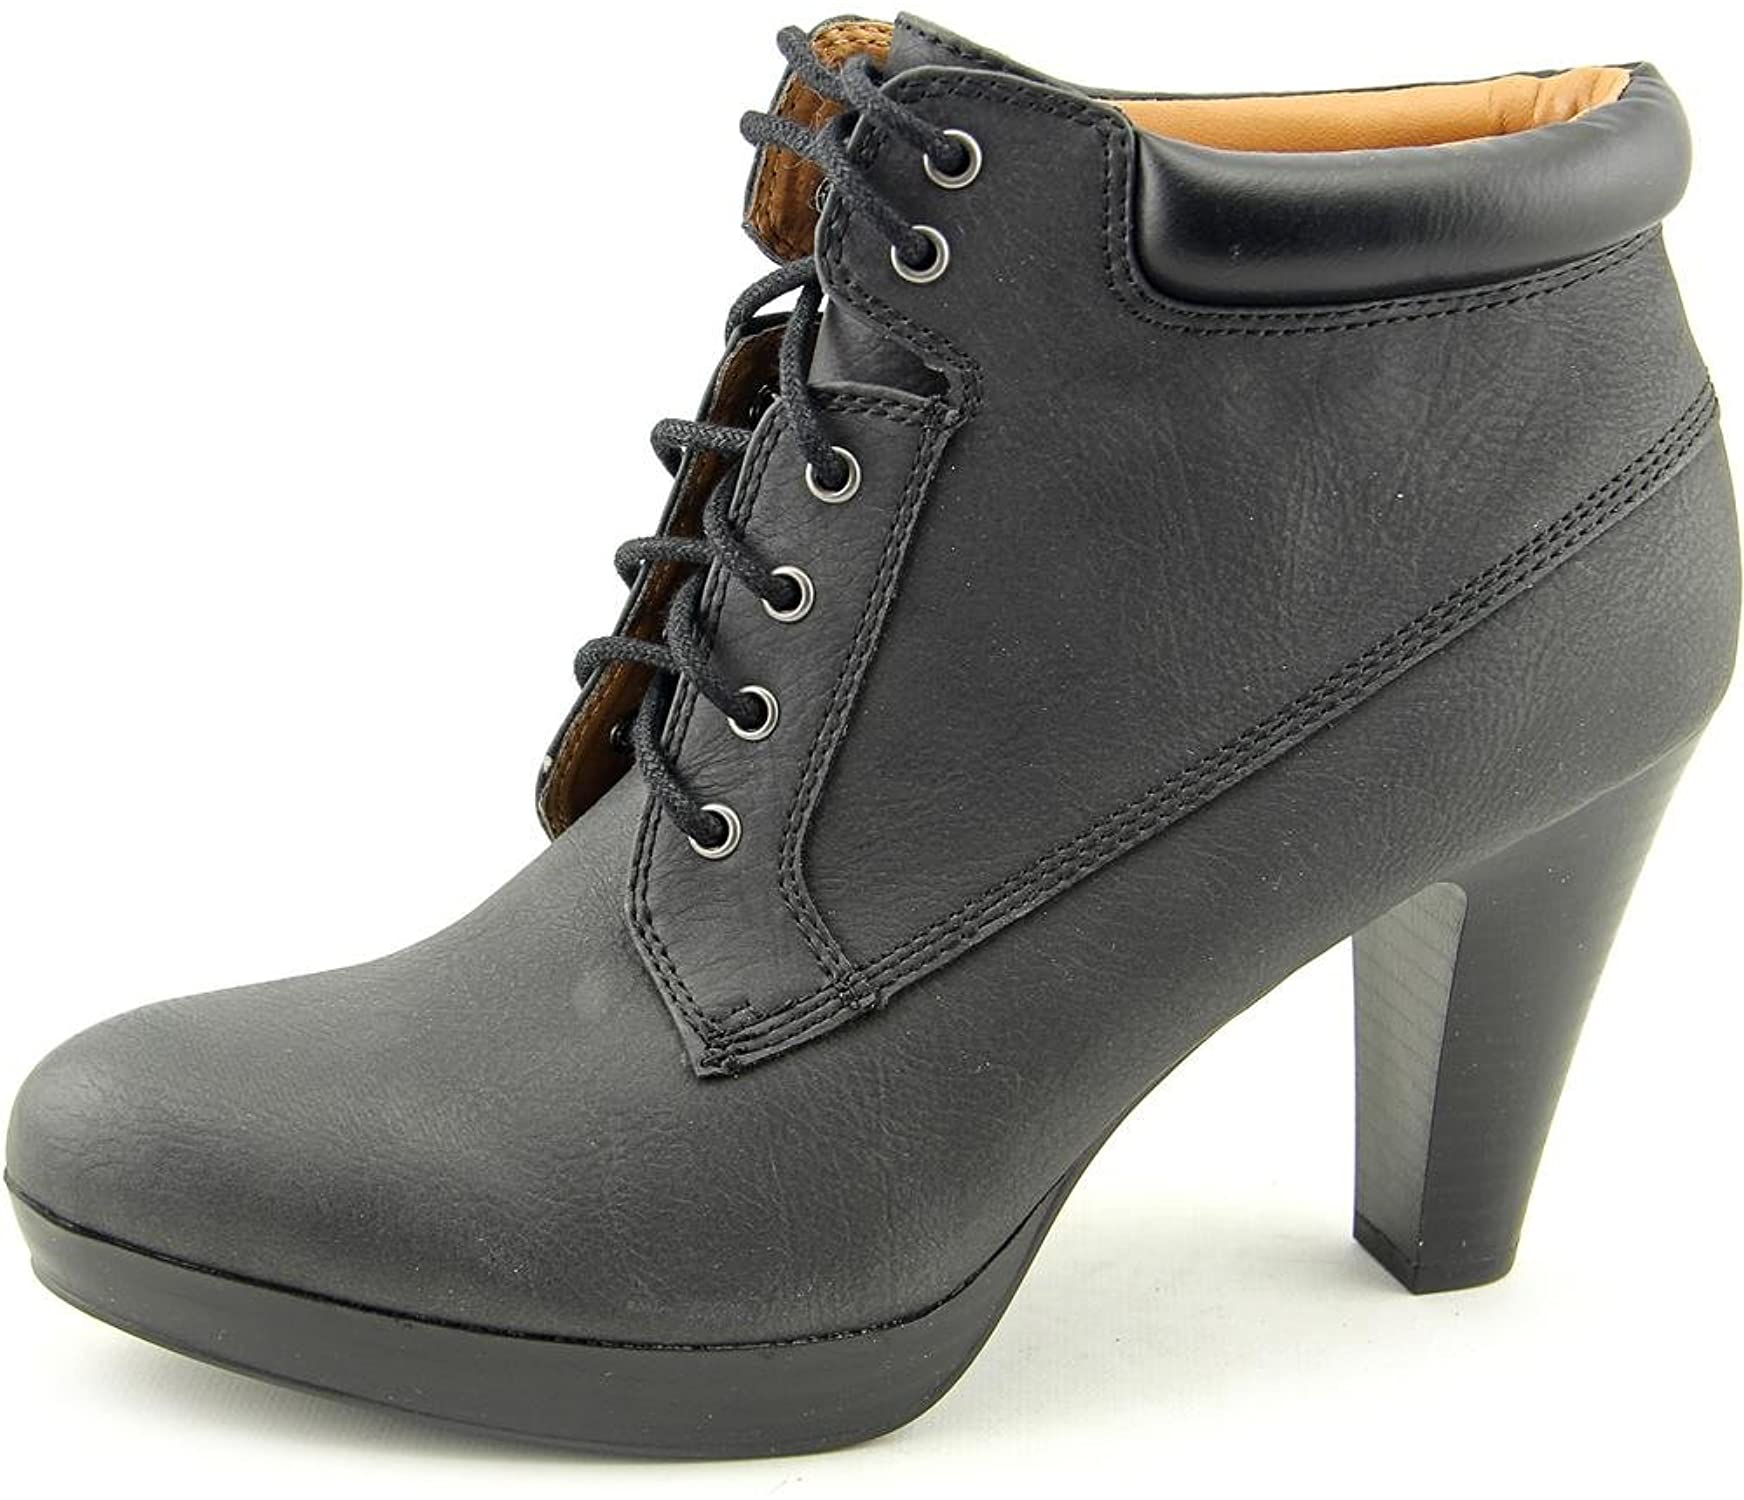 American Living Womens Lace up Platform Booties